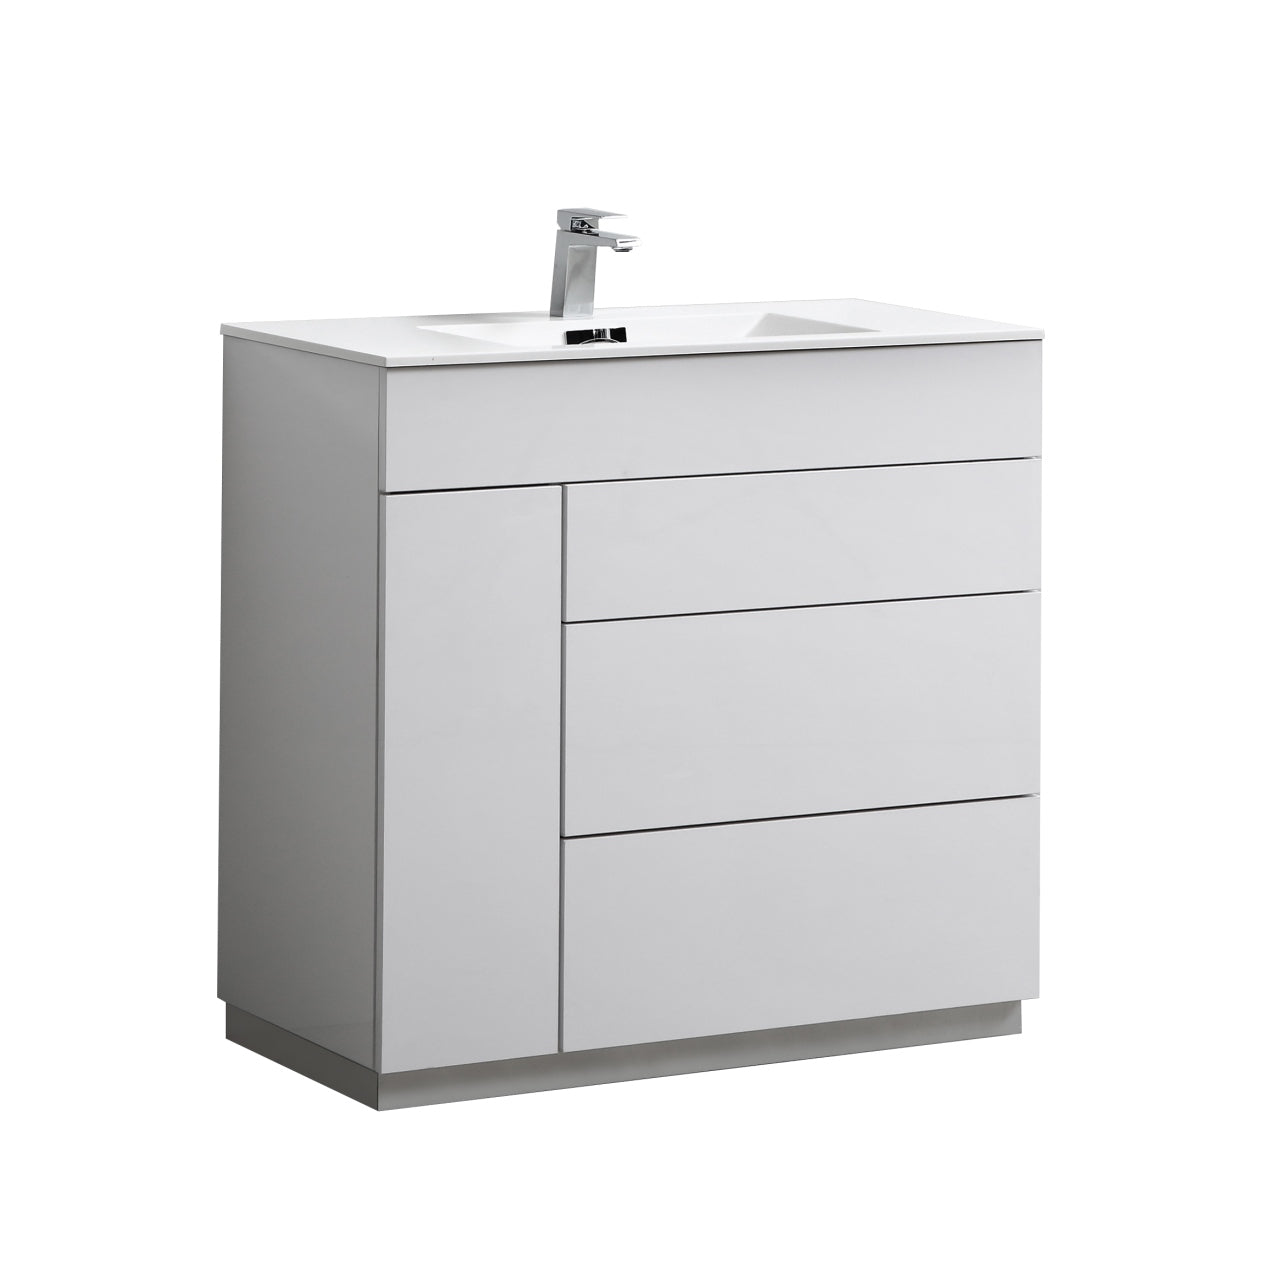 KUBEBATH Milano KFM36-GW 36" Single Bathroom Vanity in High Gloss White with White Acrylic Composite, Integrated Sink, Angled View